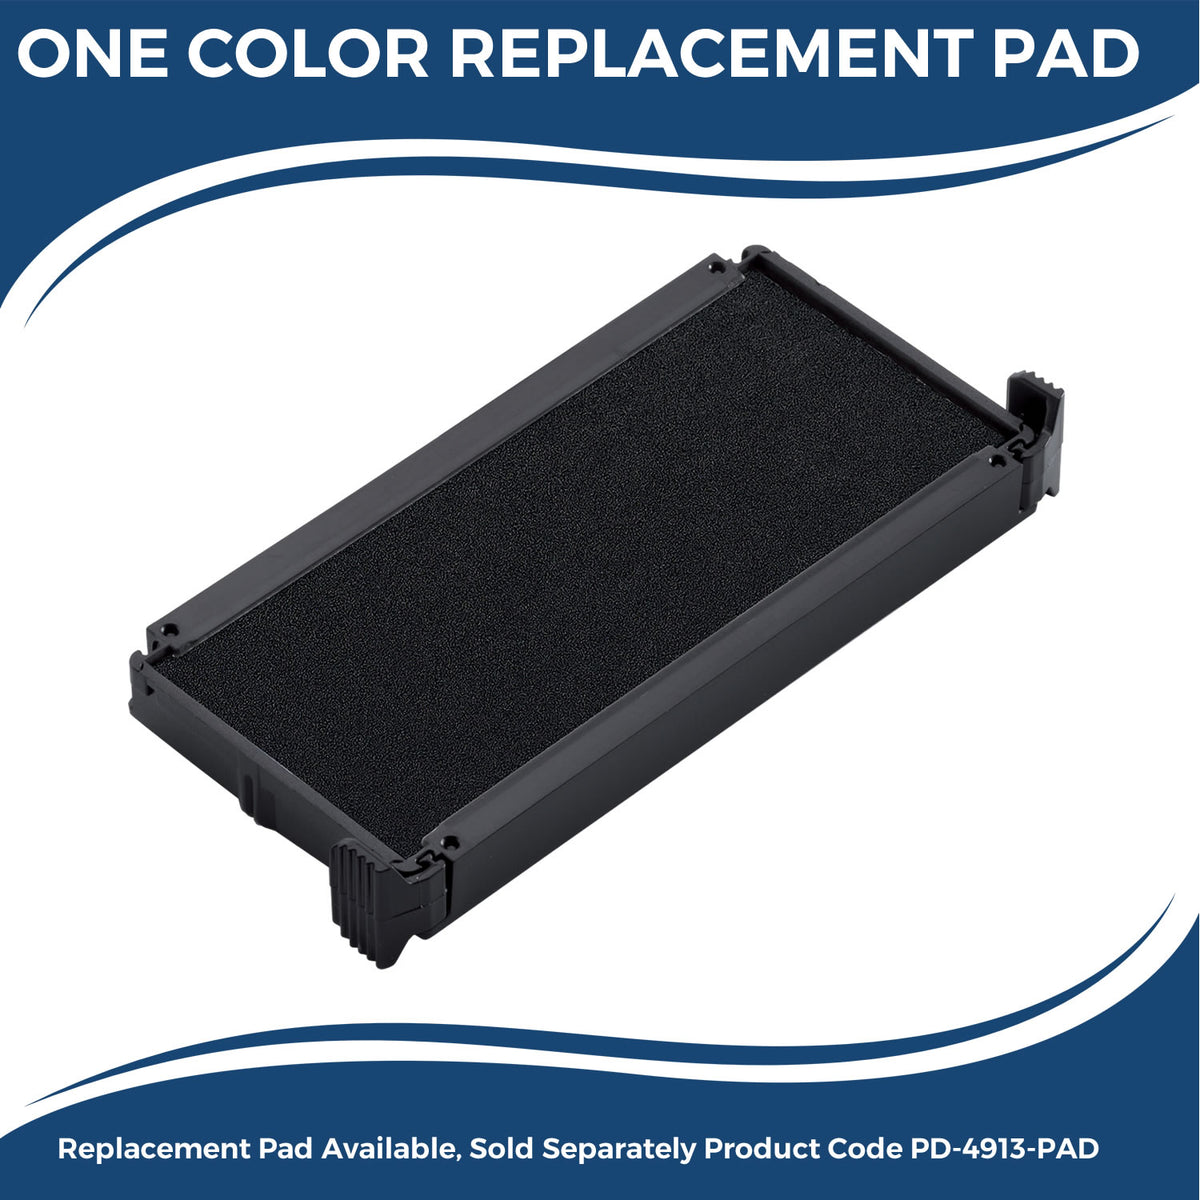 Large Self-Inking Void with X Stamp 5666S Large Replacment Pad